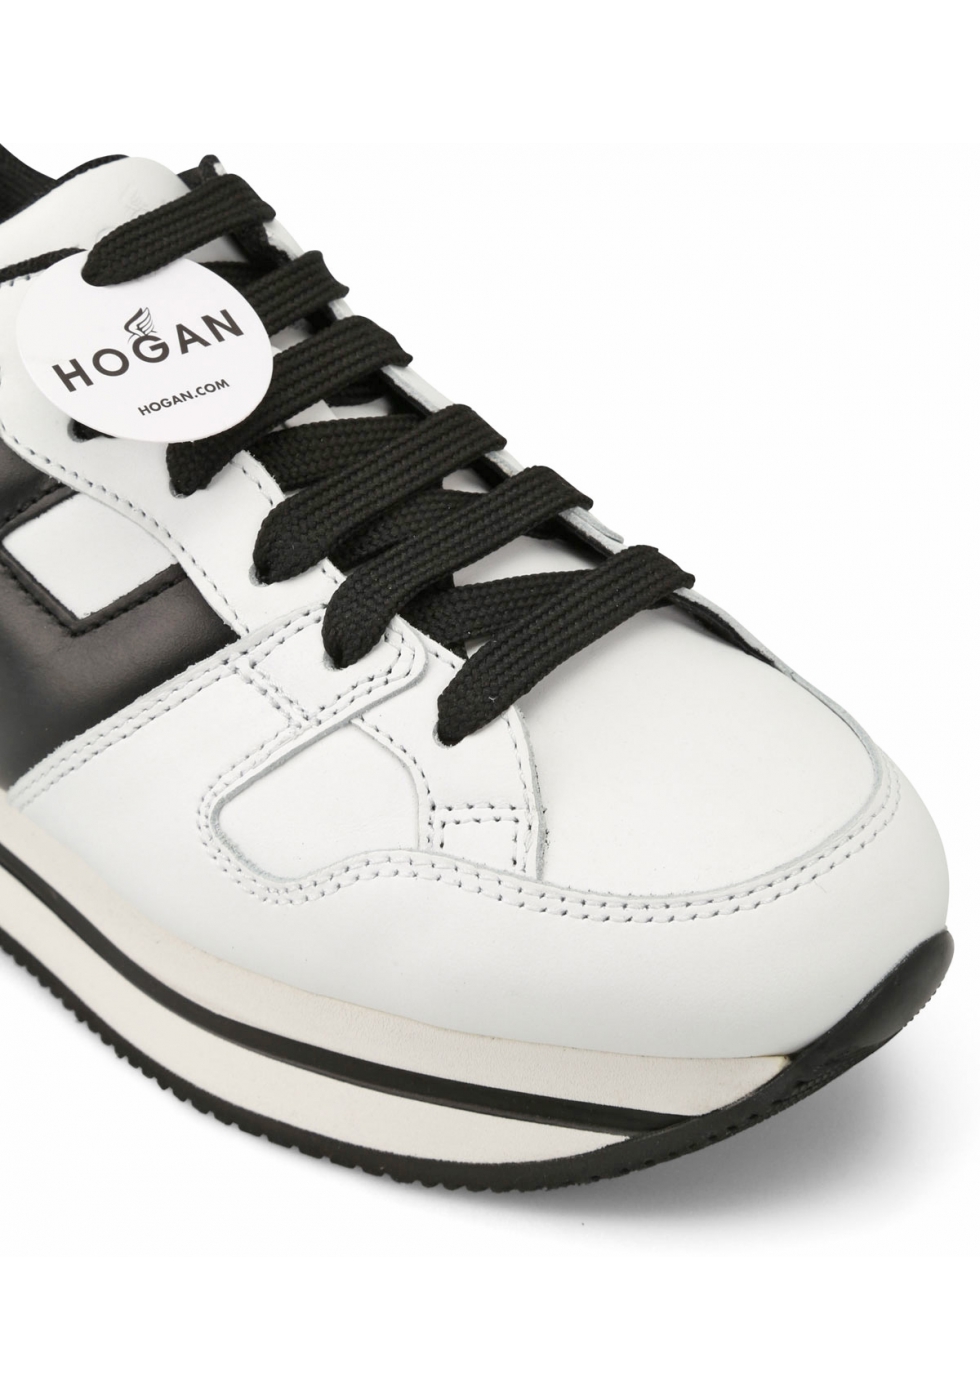 Hogan Women's fashion sneakers shoes in white leather with black logo ...